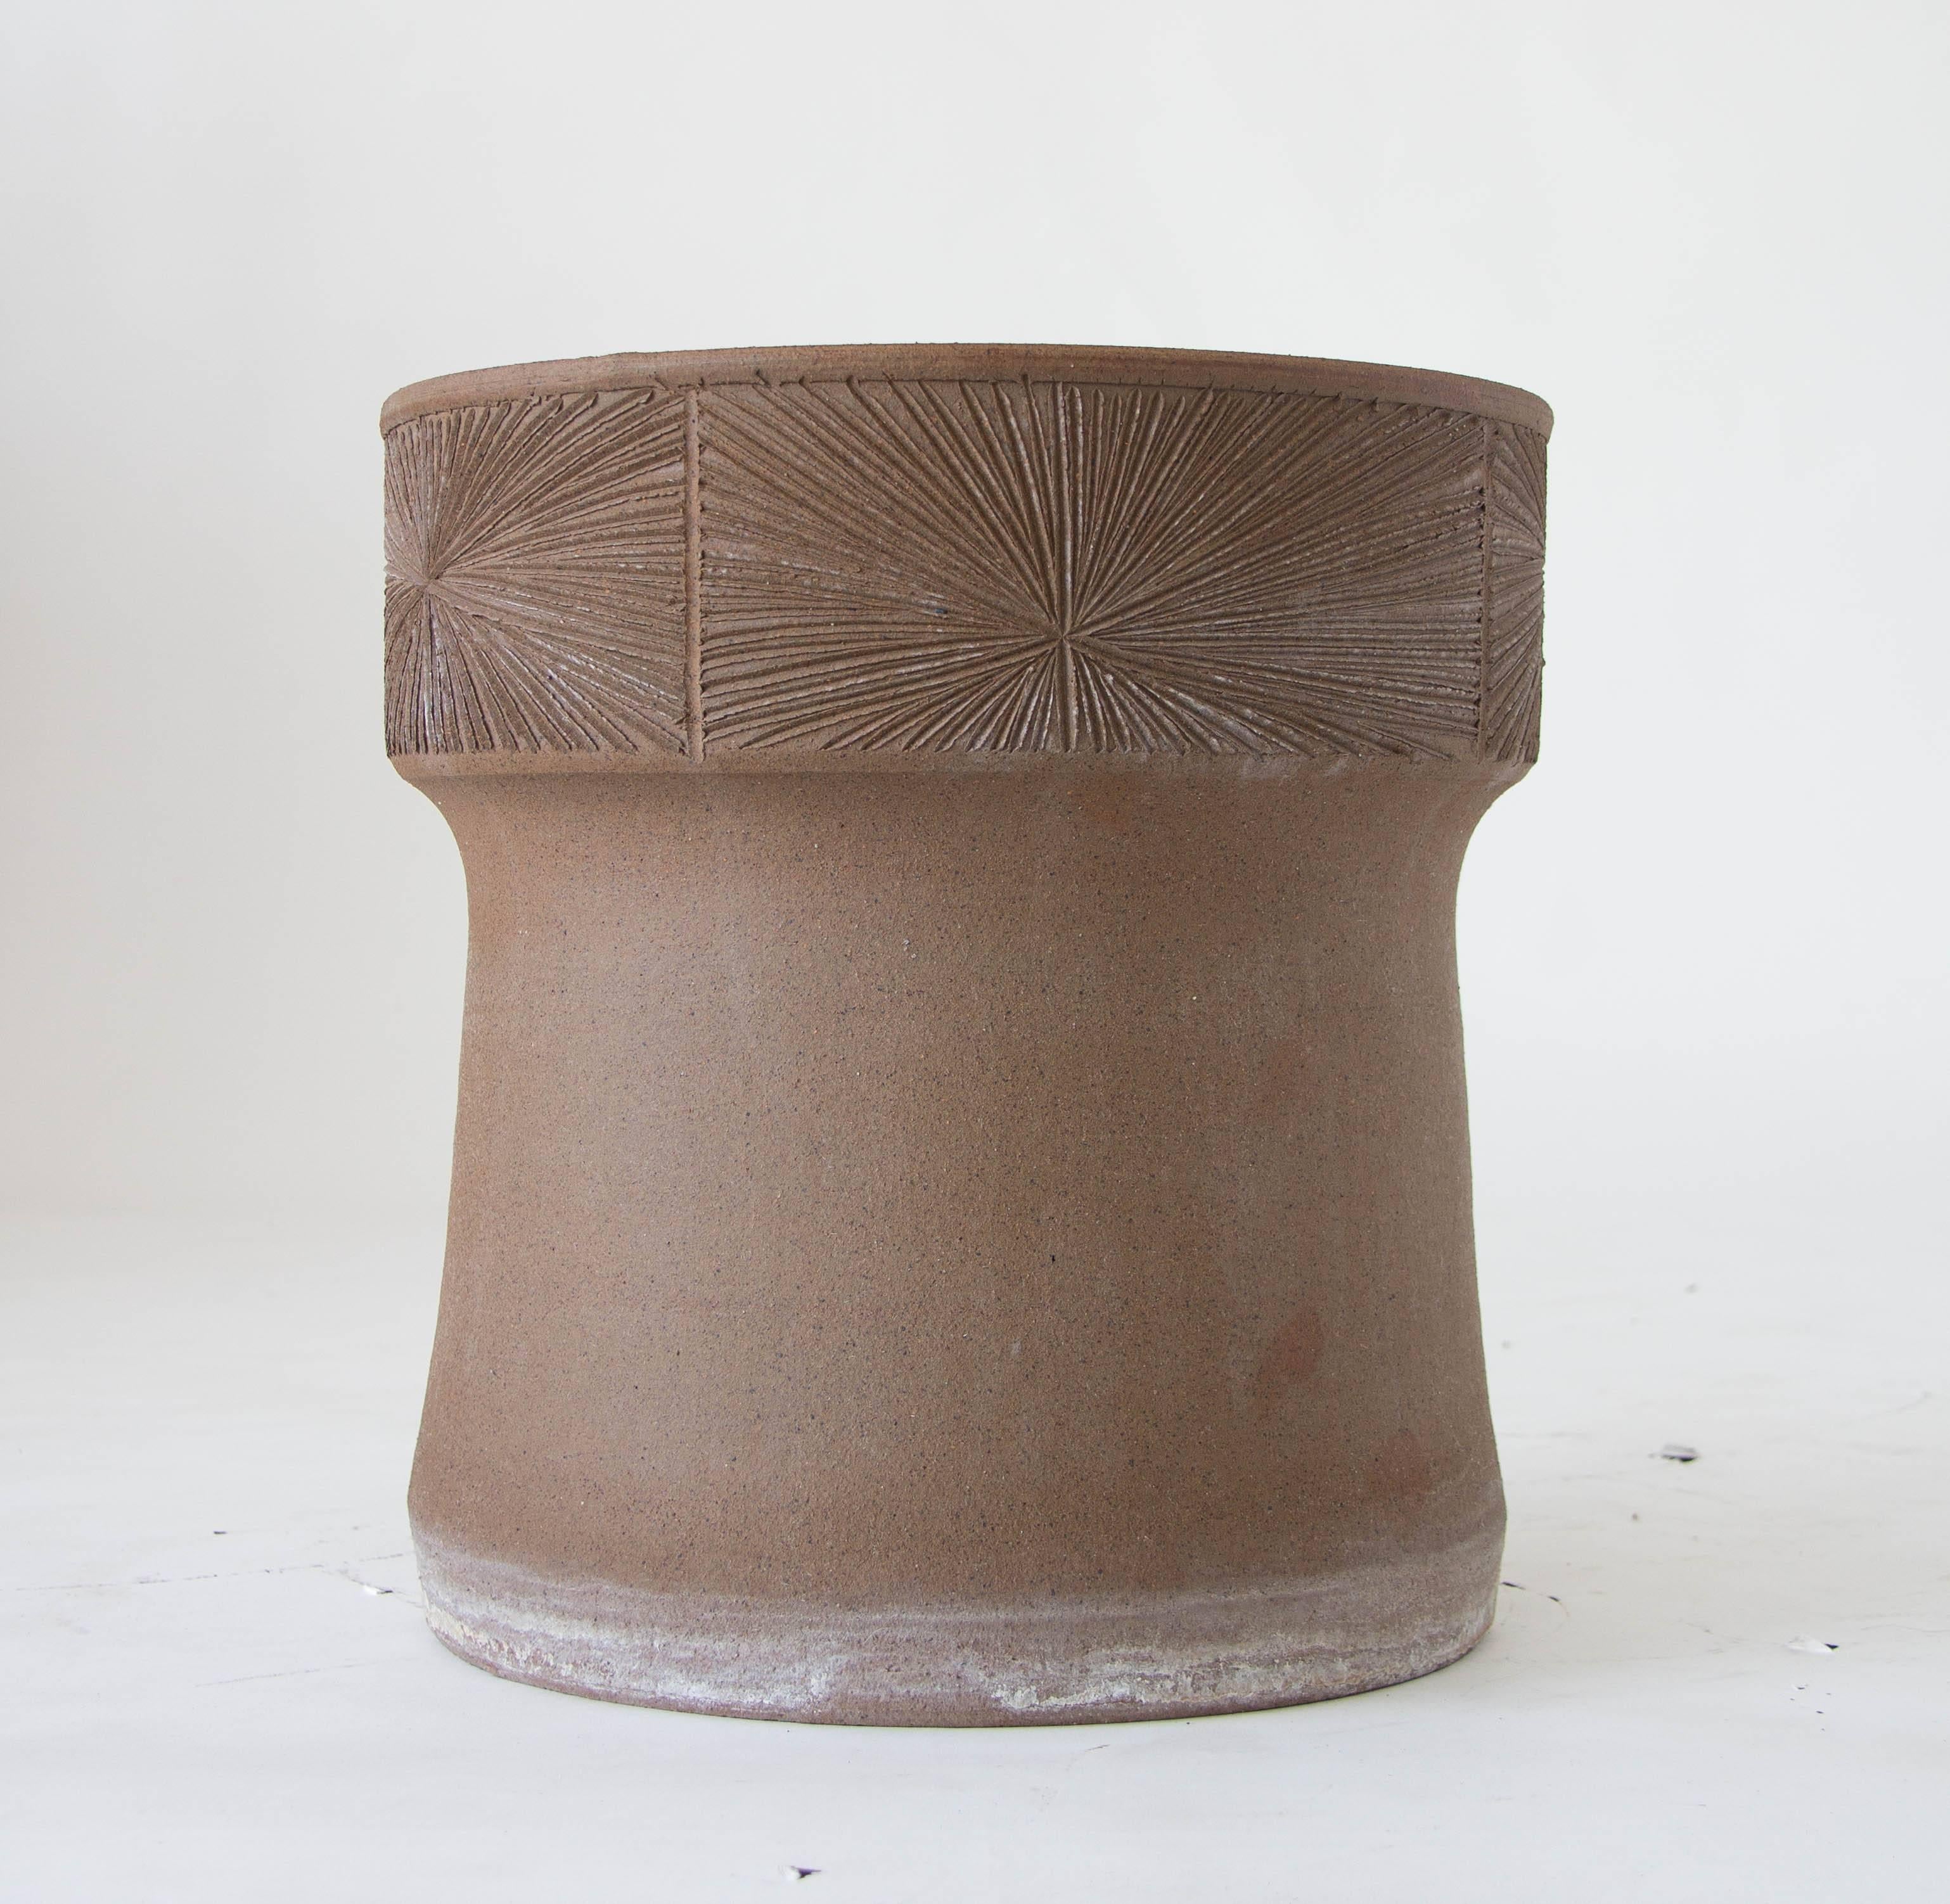 A stoneware planter from David Cressey/Robert Maxwell 1970s collaboration Earthgender. The planter has plain sides flared towards the foot, and a wide lip with an incised sunburst pattern. The interior of the planter is glazed. 

Condition: